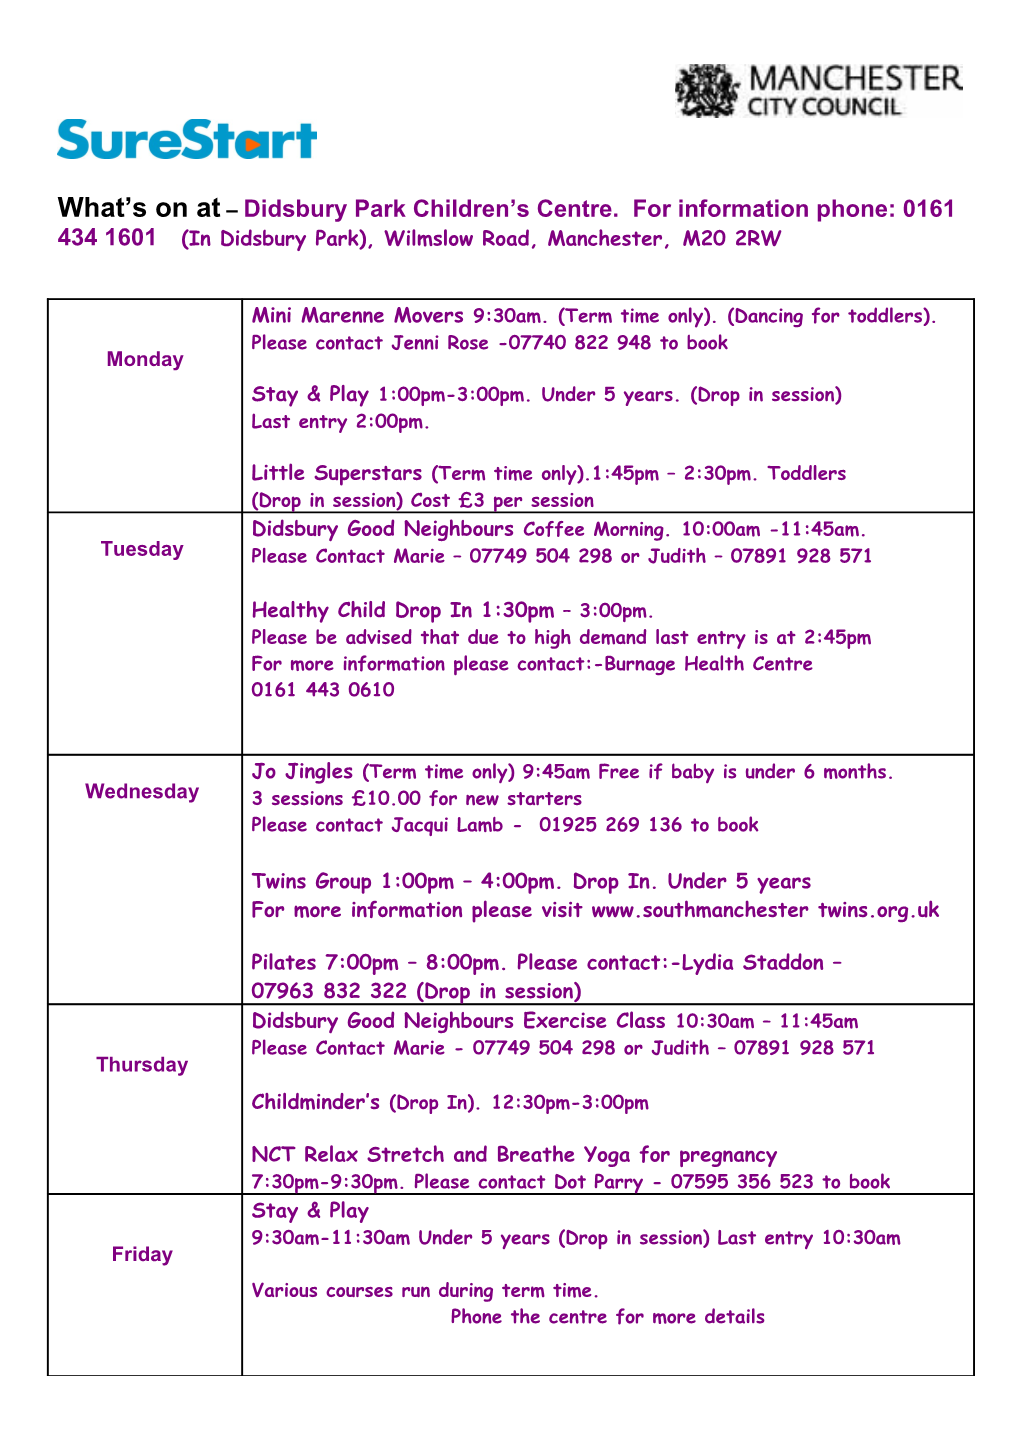 What S on at Didsburypark Children S Centre. for Information Phone: 0161 434 1601 (In